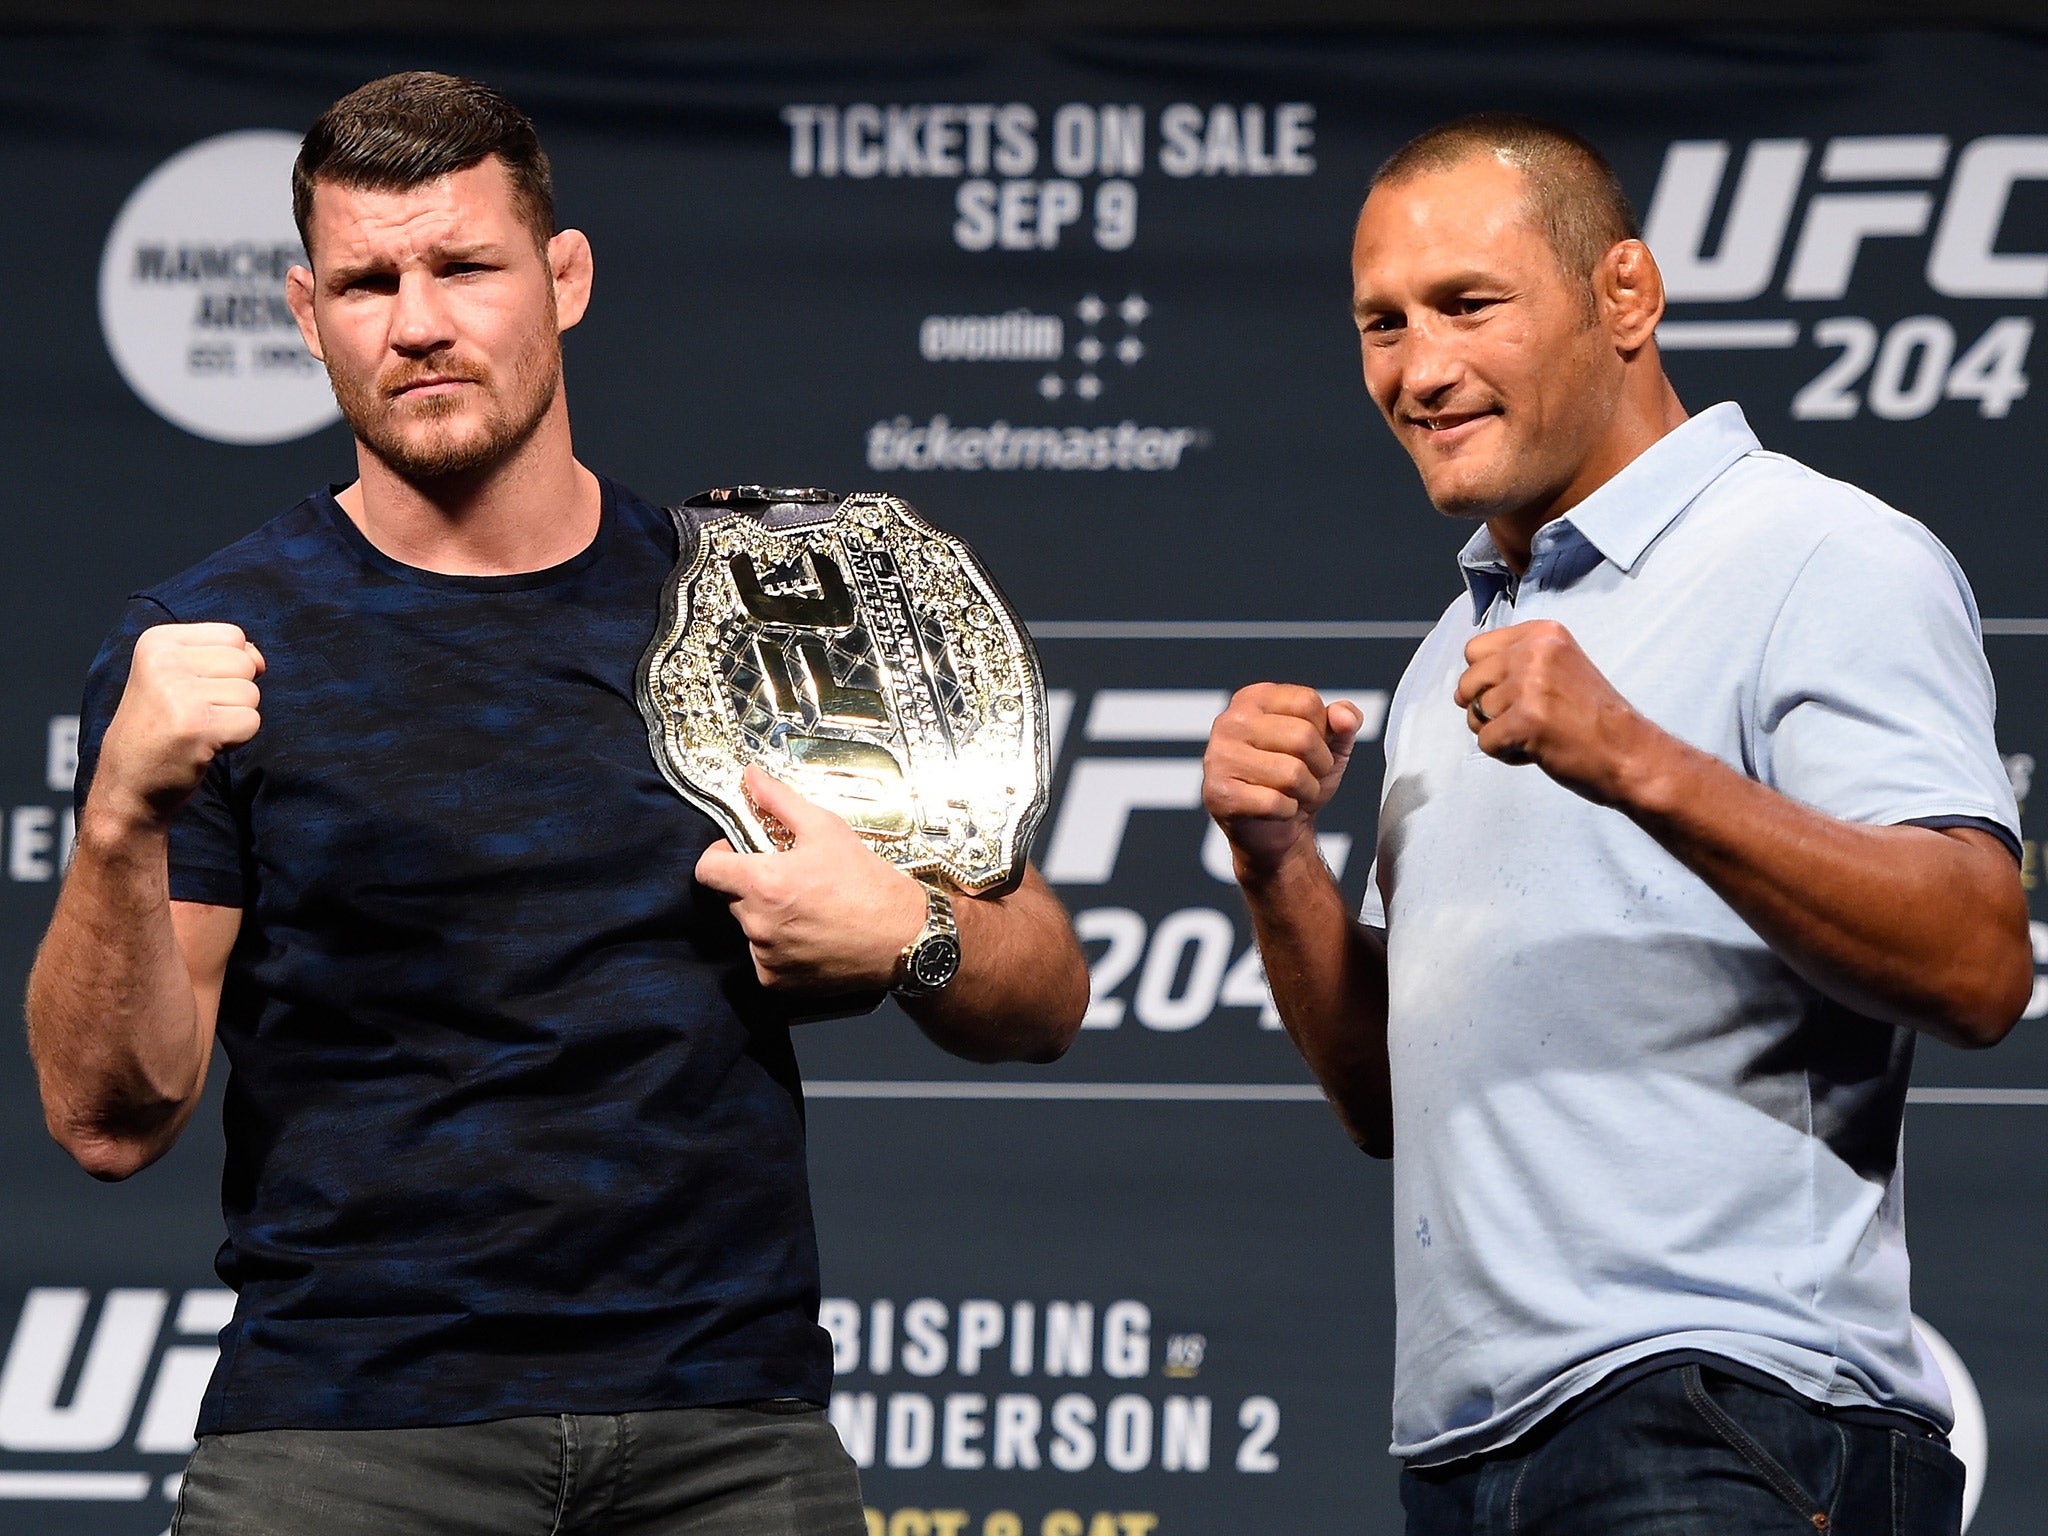 Michael Bisping defends his UFC middleweight championship against Dan Henderson